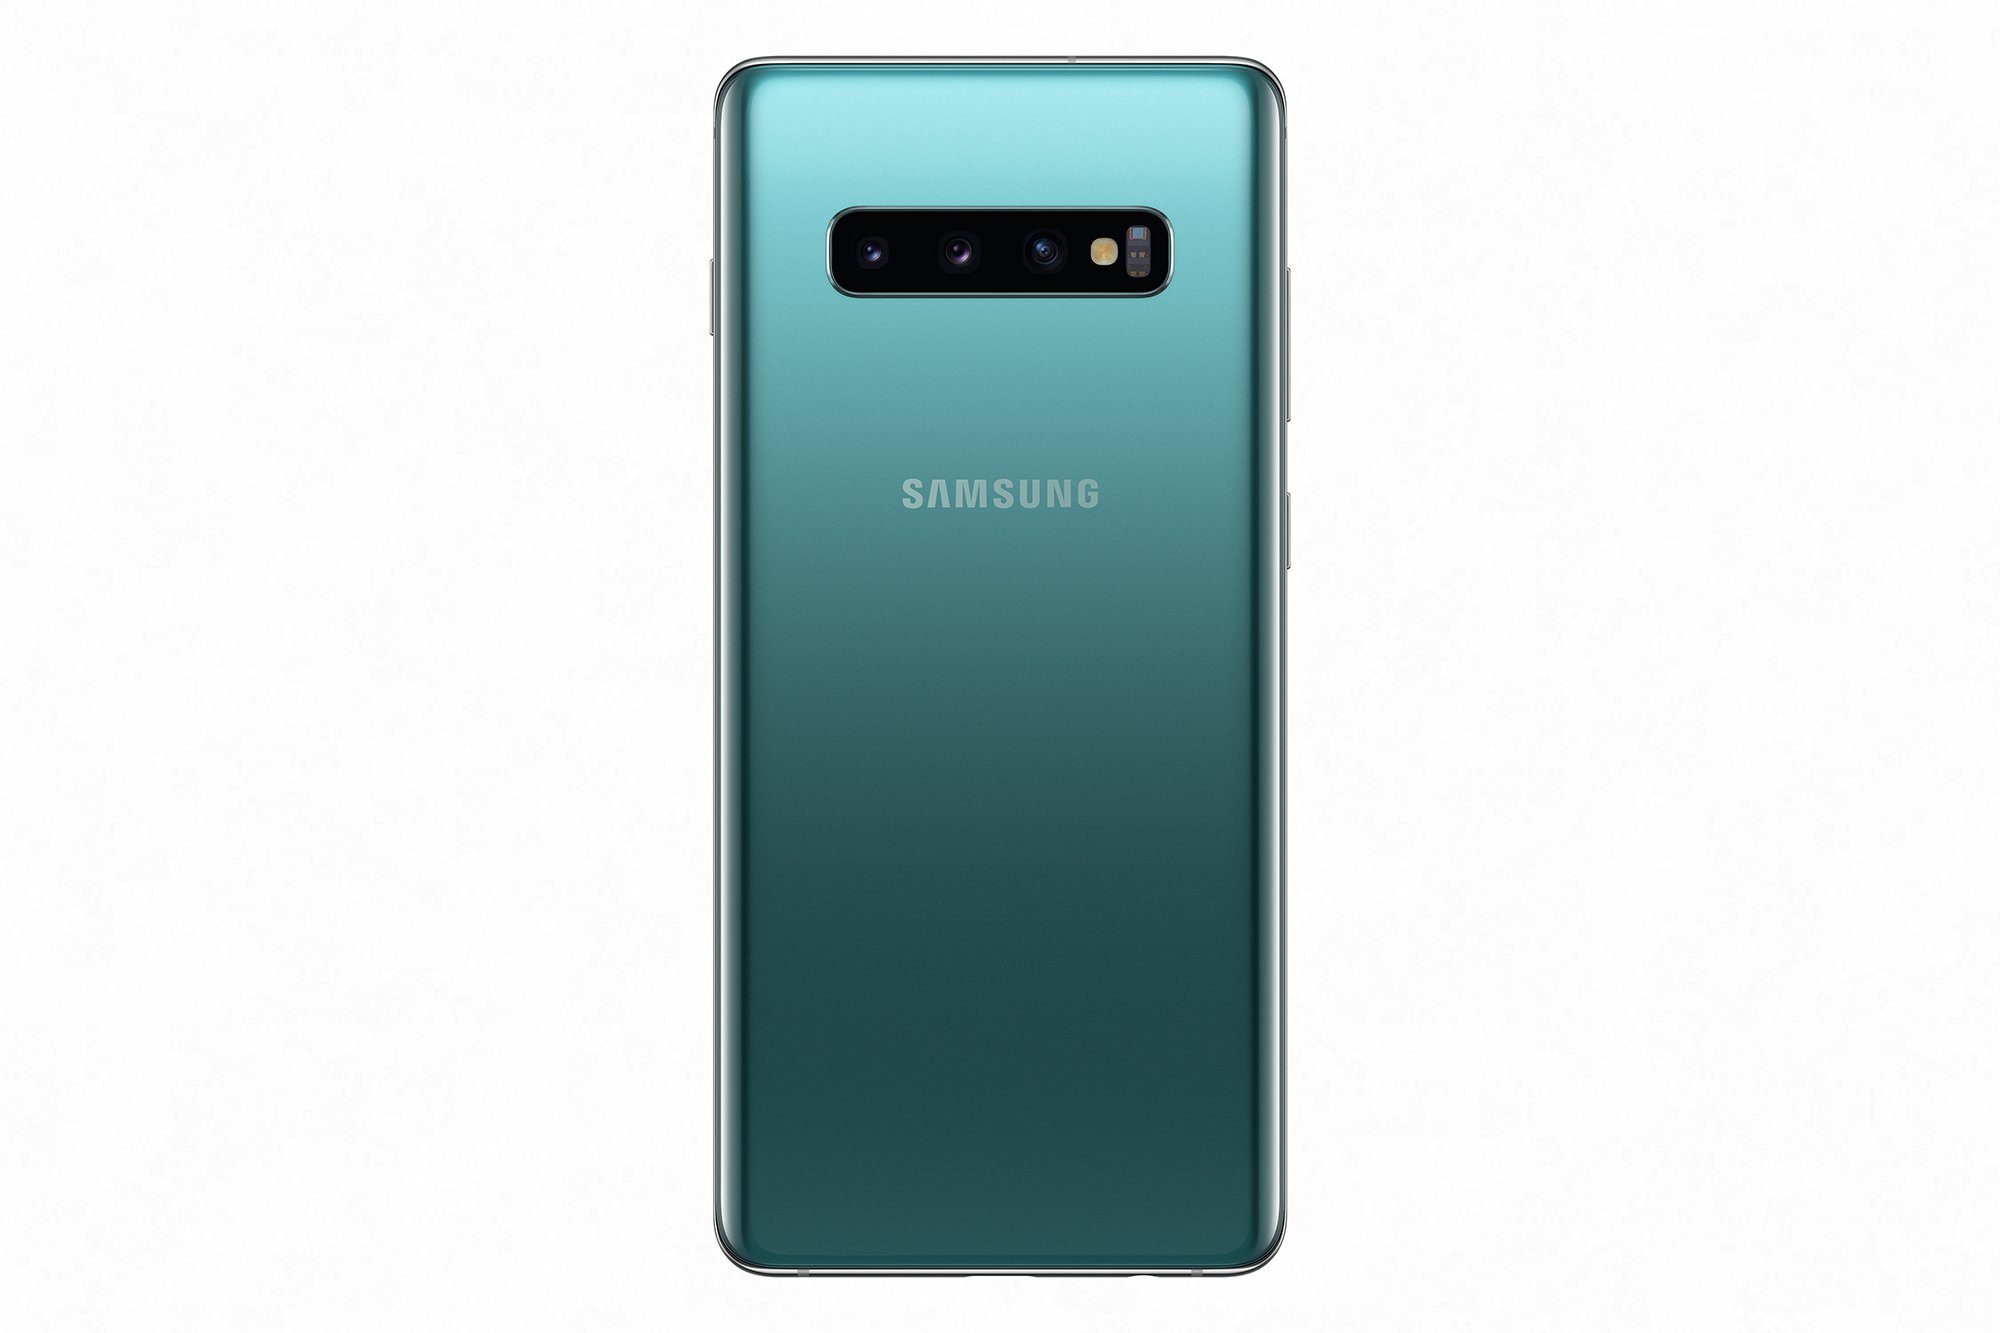 Which Galaxy S10 Color to Buy: Black, White, Blue or Ceramic?